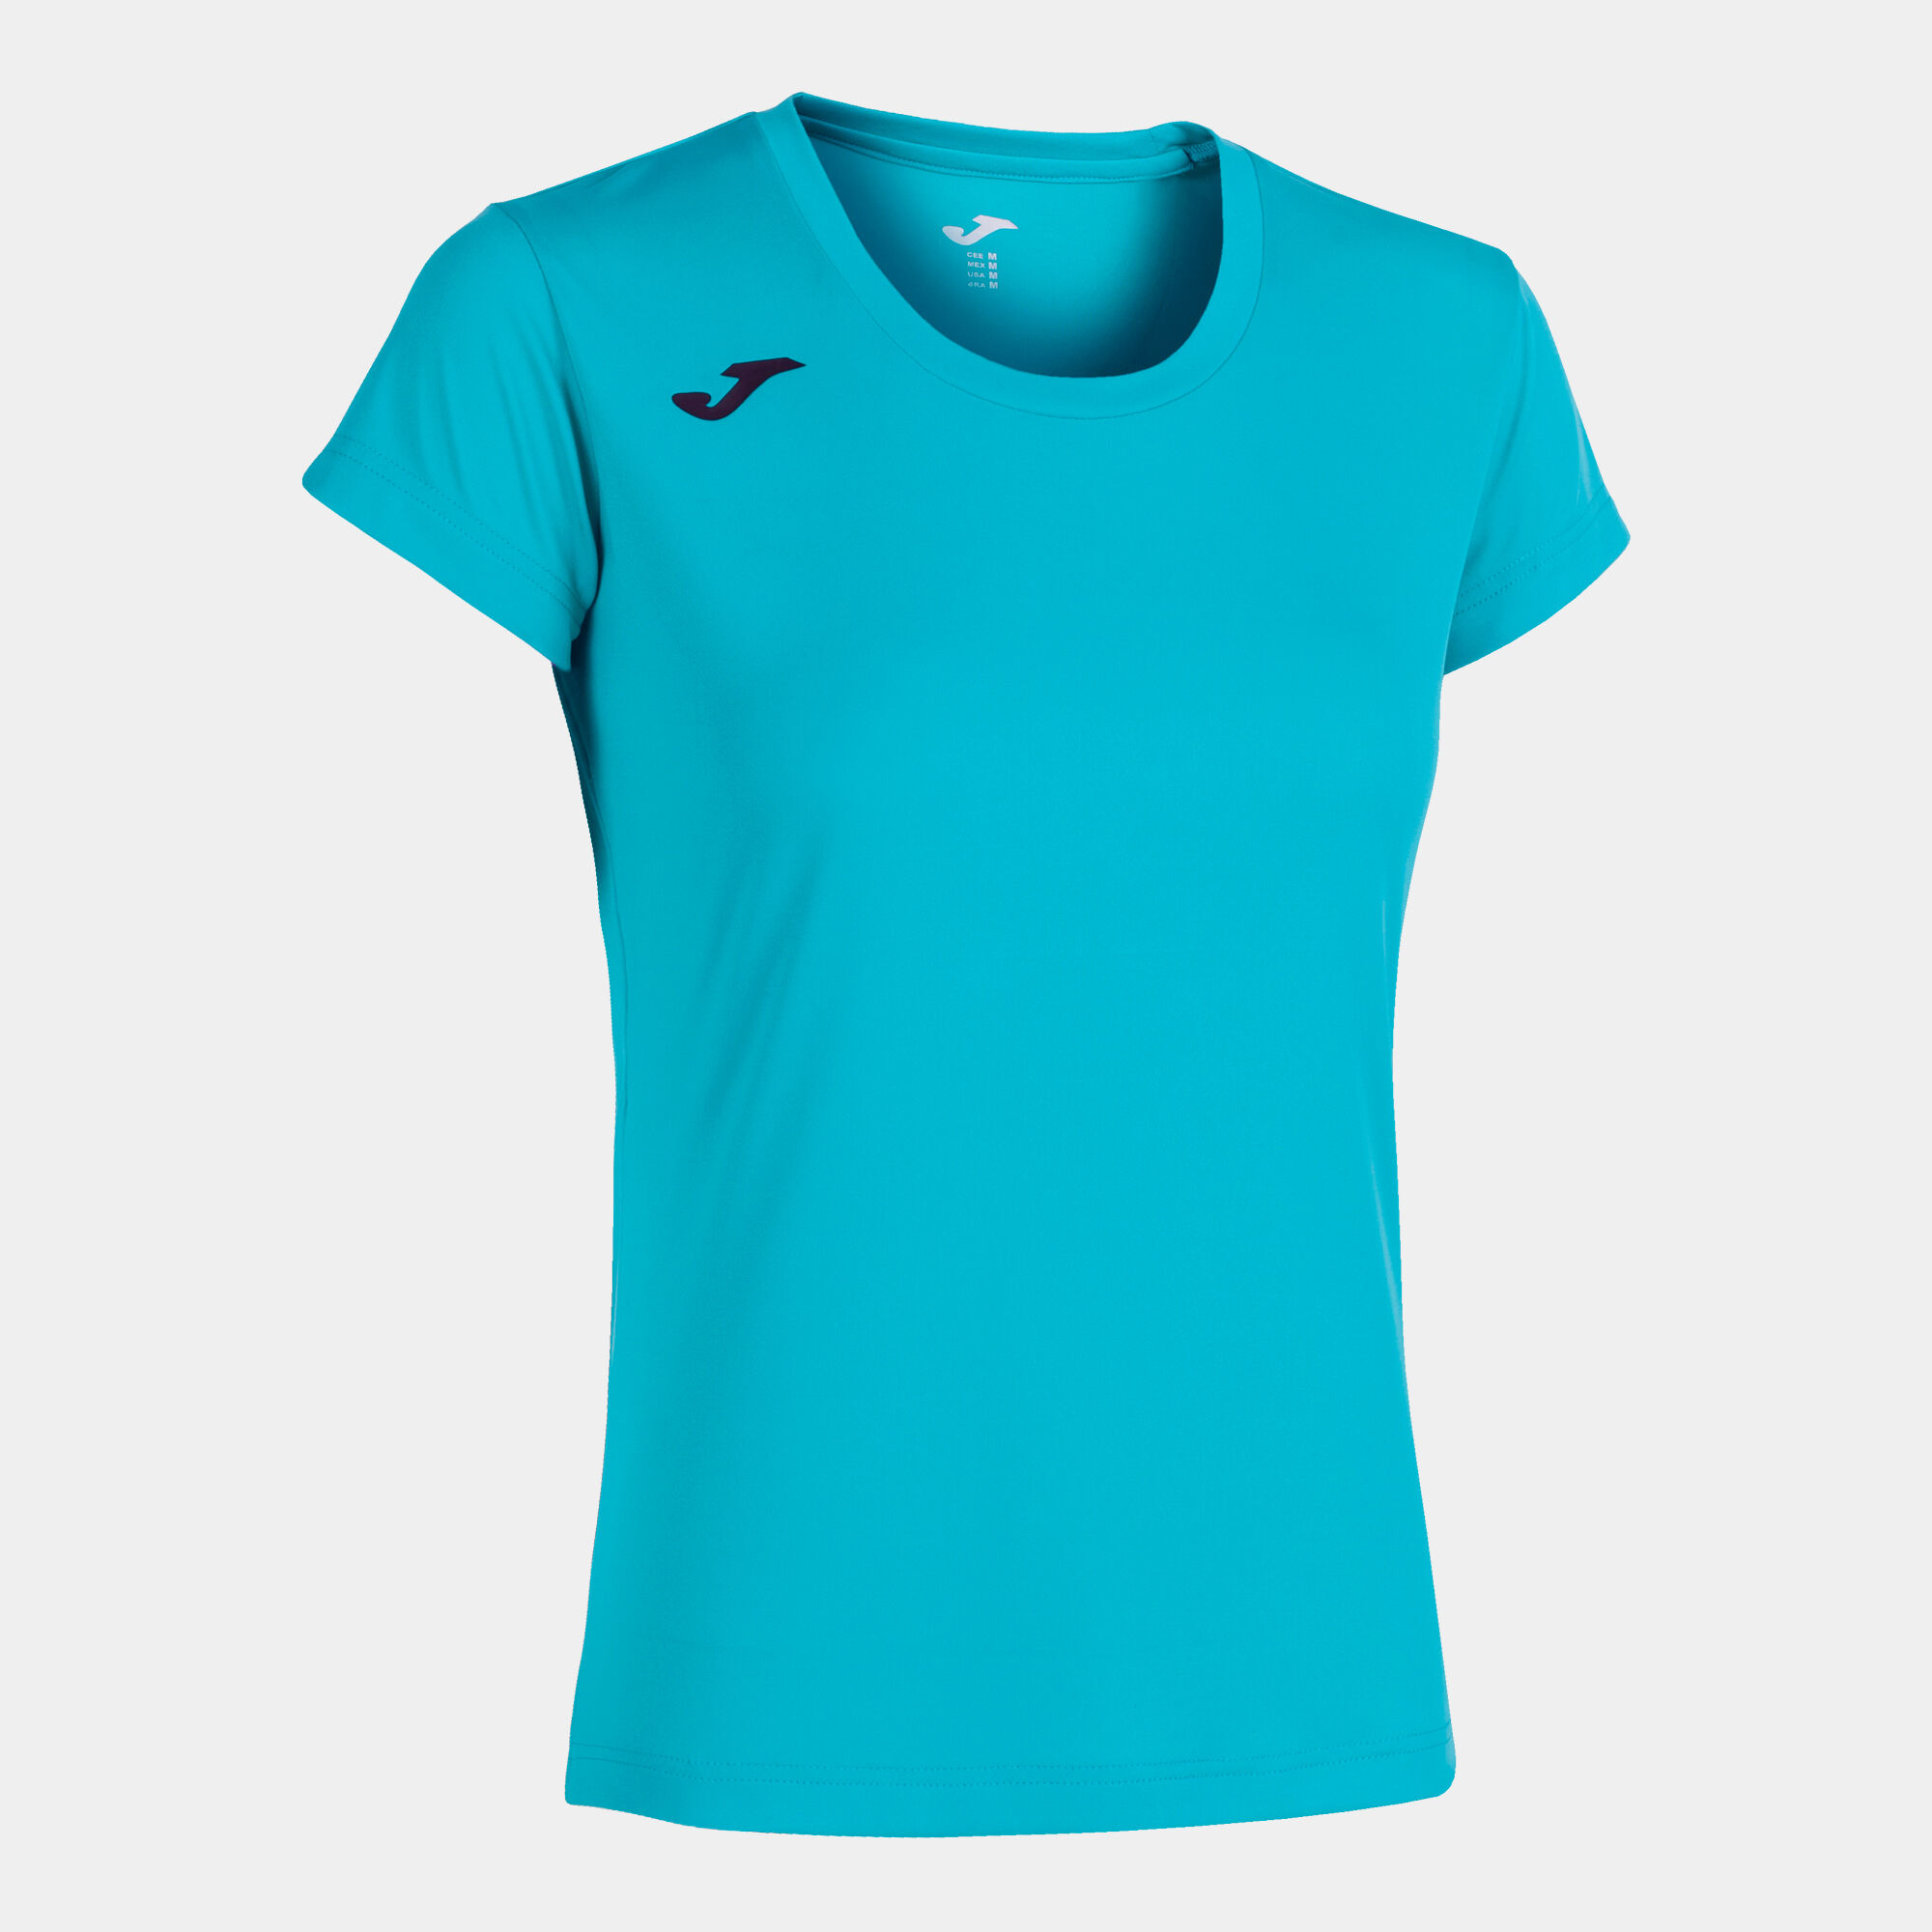 Maillot manches courtes femme Record II turquoise fluo